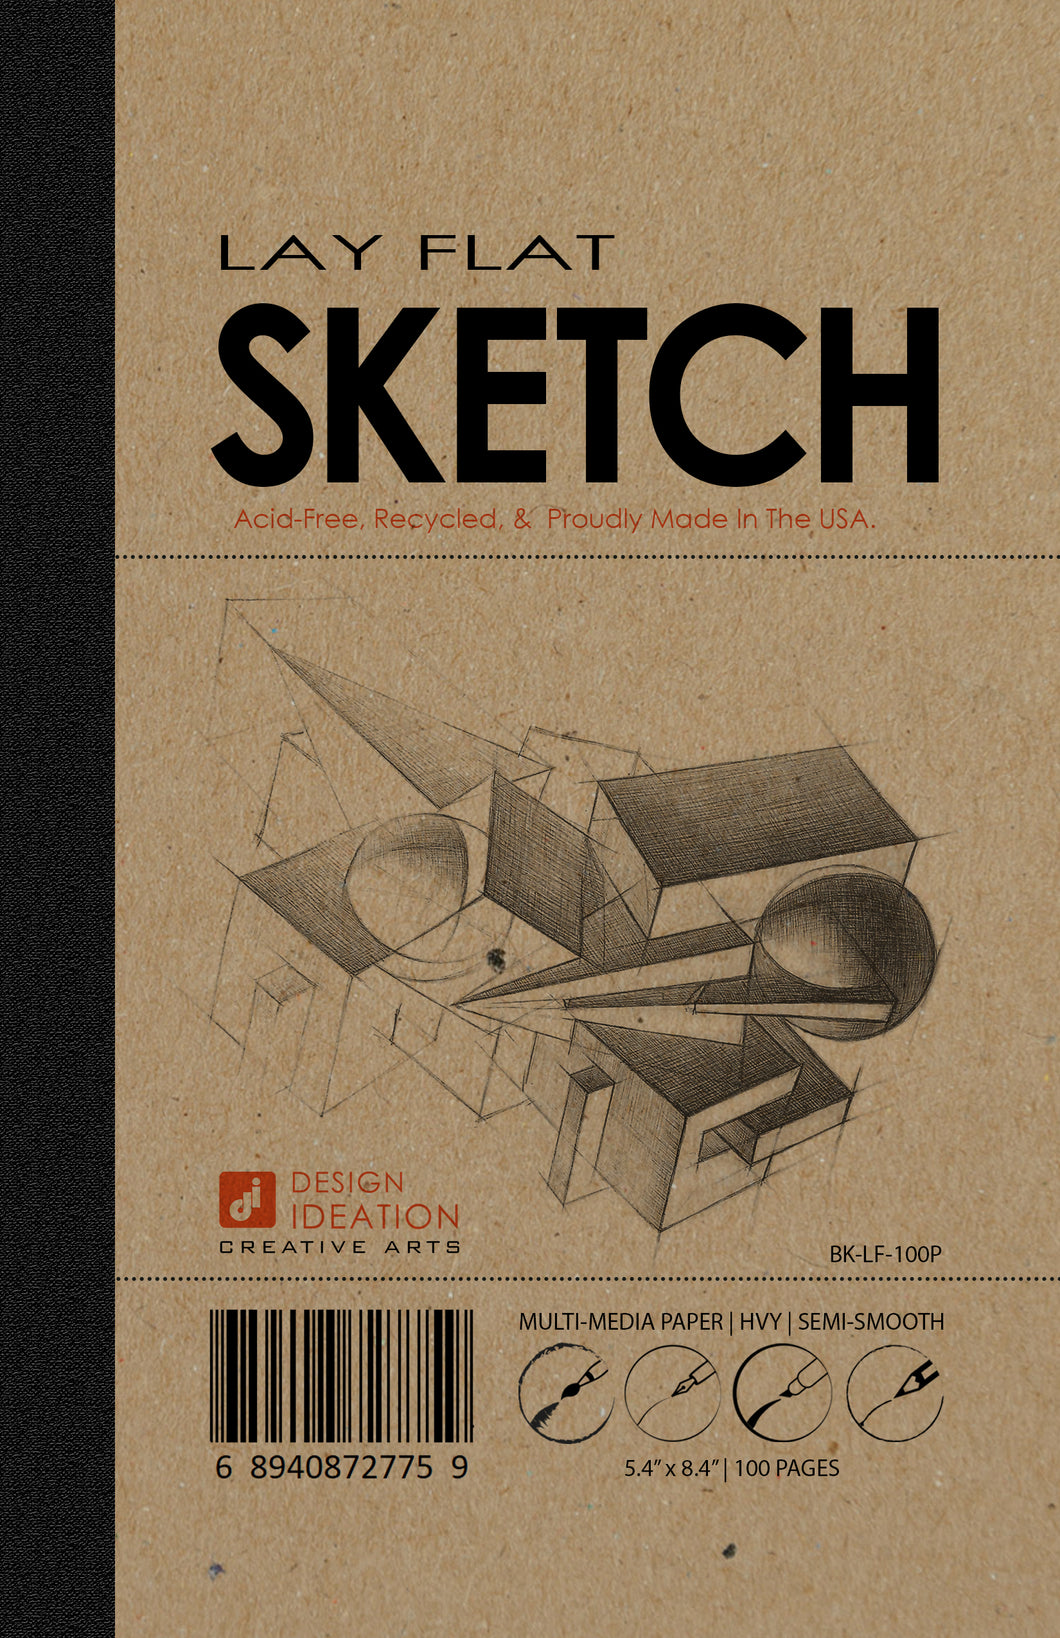 LAY FLAT sketchbook. Removable sheet, journal style SKETCH book for pencil, ink, marker, charcoal and watercolor paints. (5.5